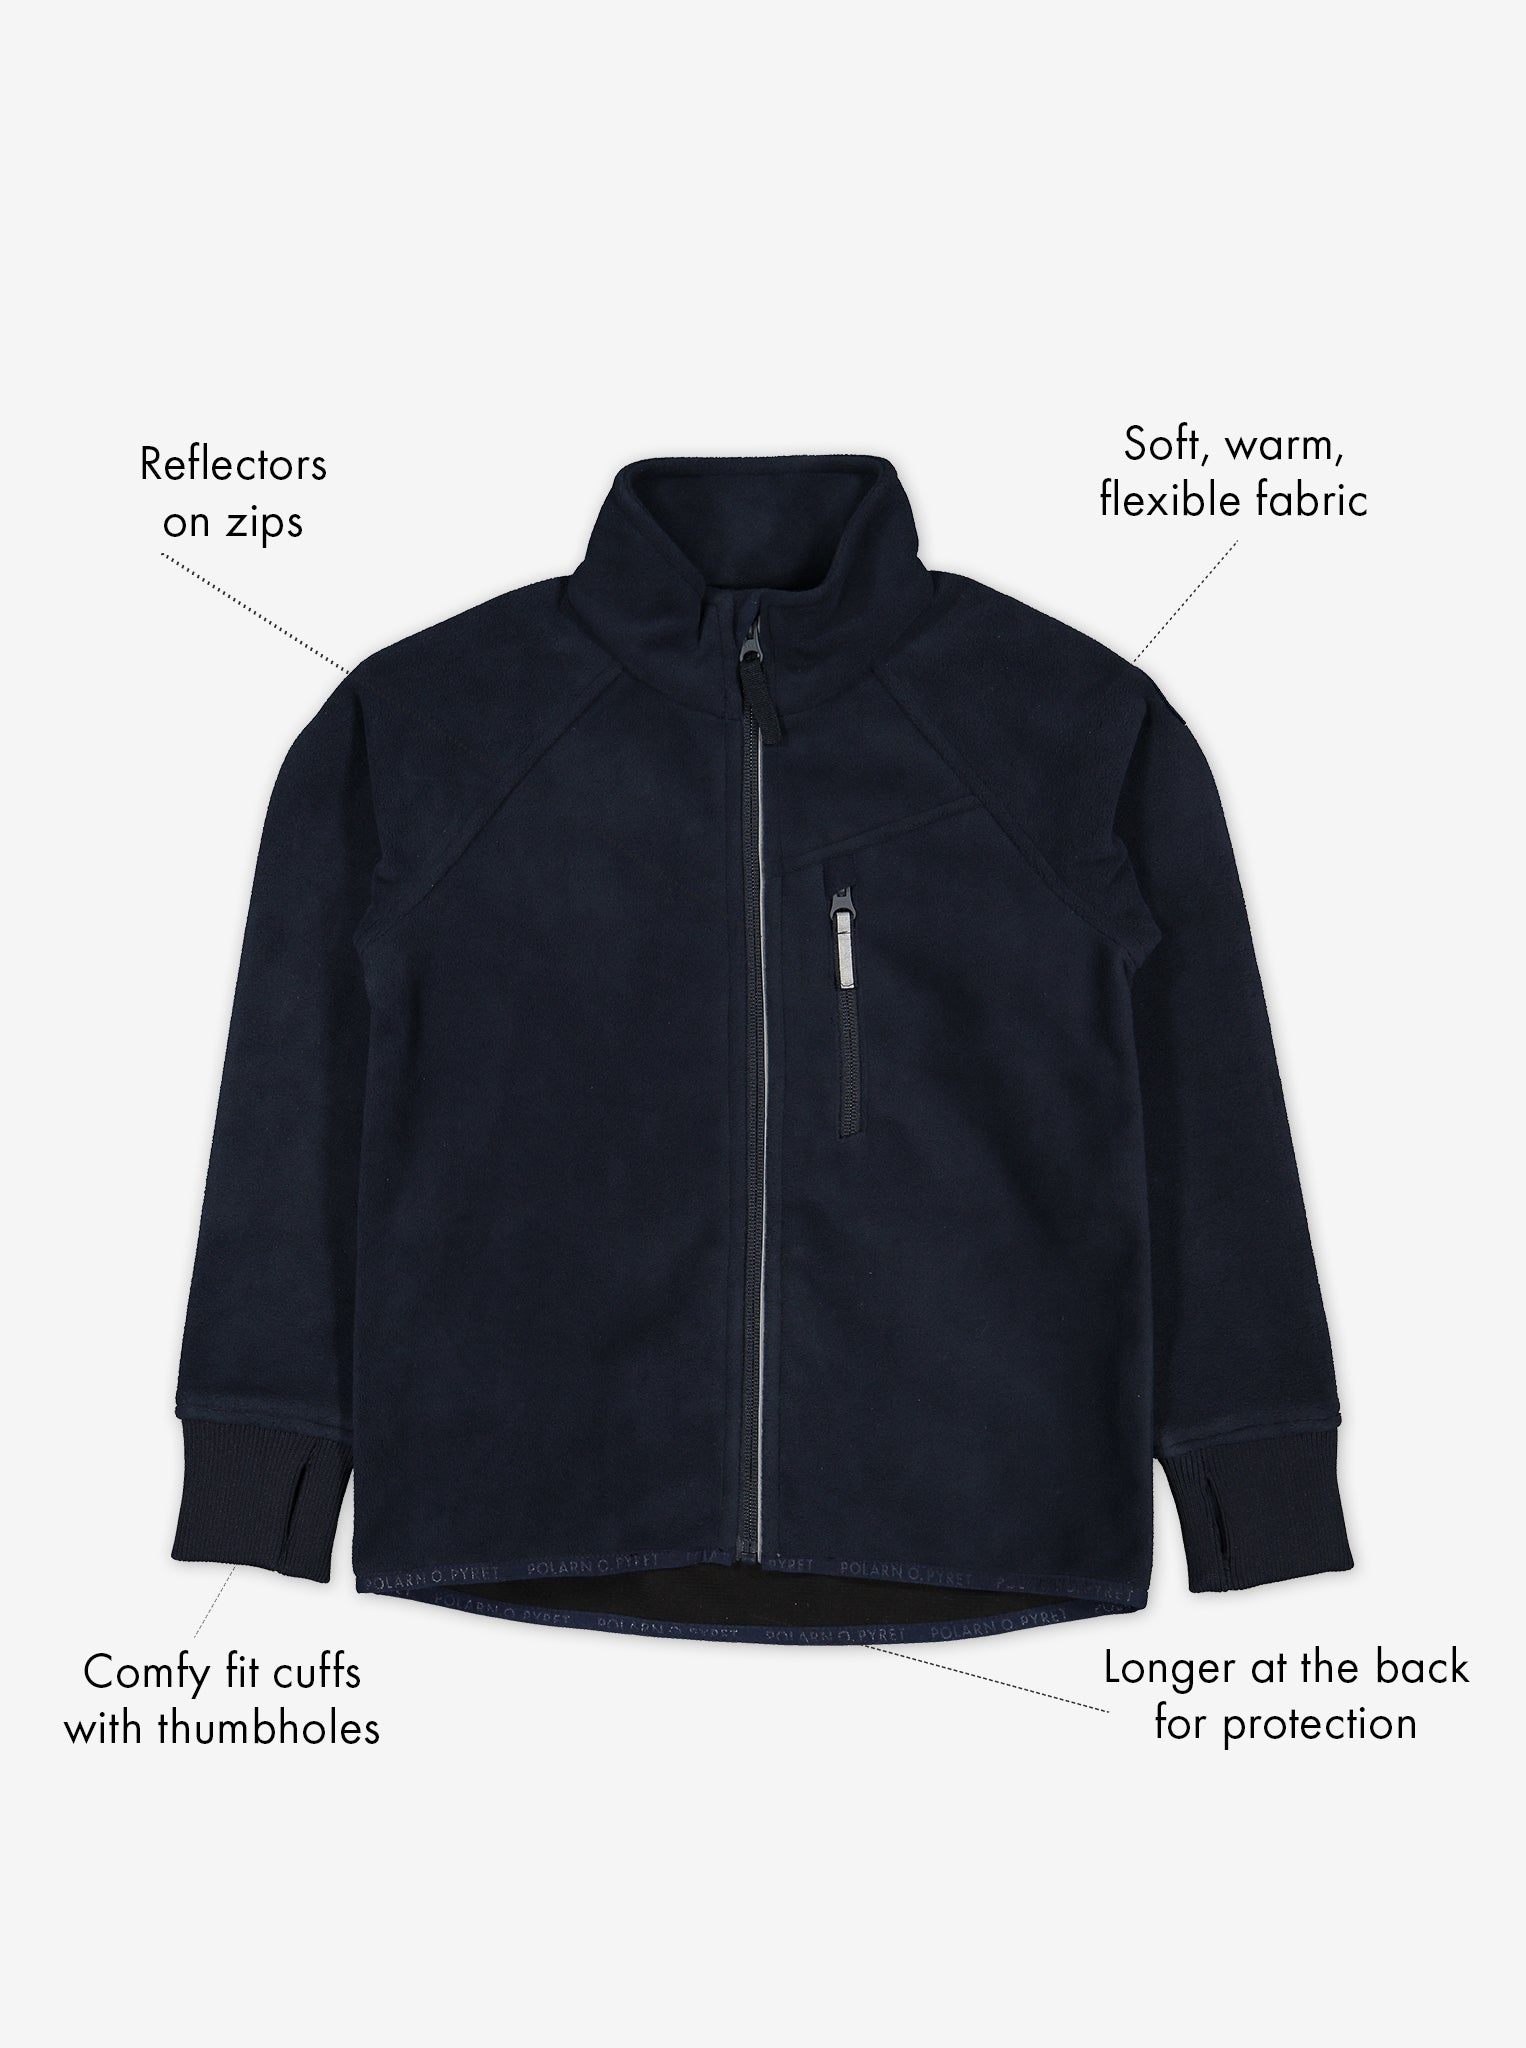 Navy, kids waterproof fleece jacket, with reflectors on zips and cuffs with thumbholes, made of soft and warm fabric.